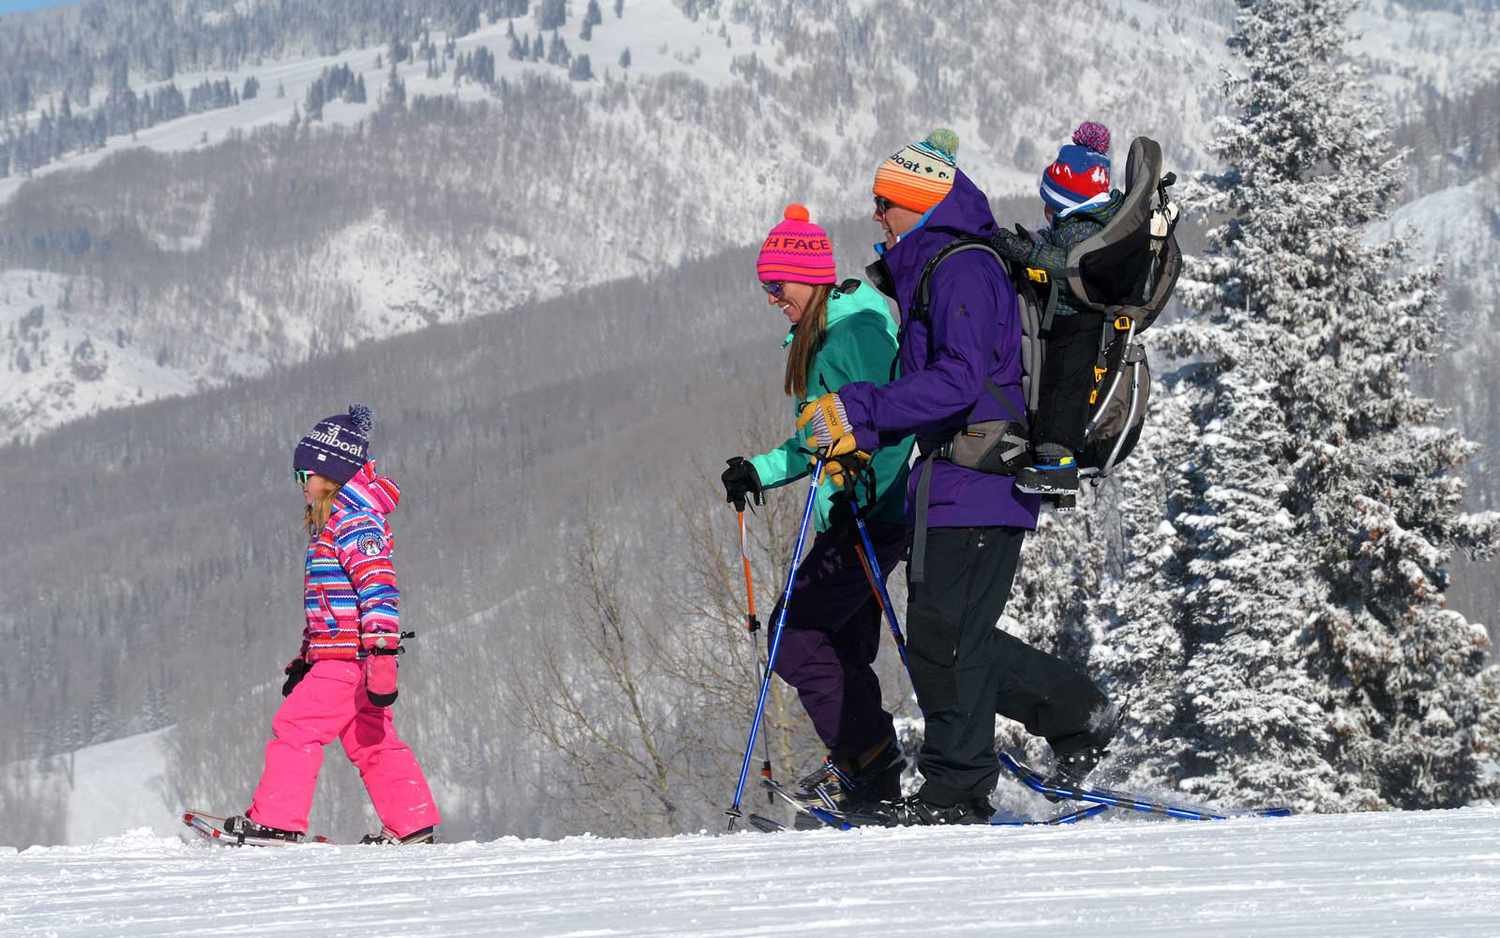 The 12 Best Family-friendly Ski Resorts That Cater to Kids — and Kids at Heart